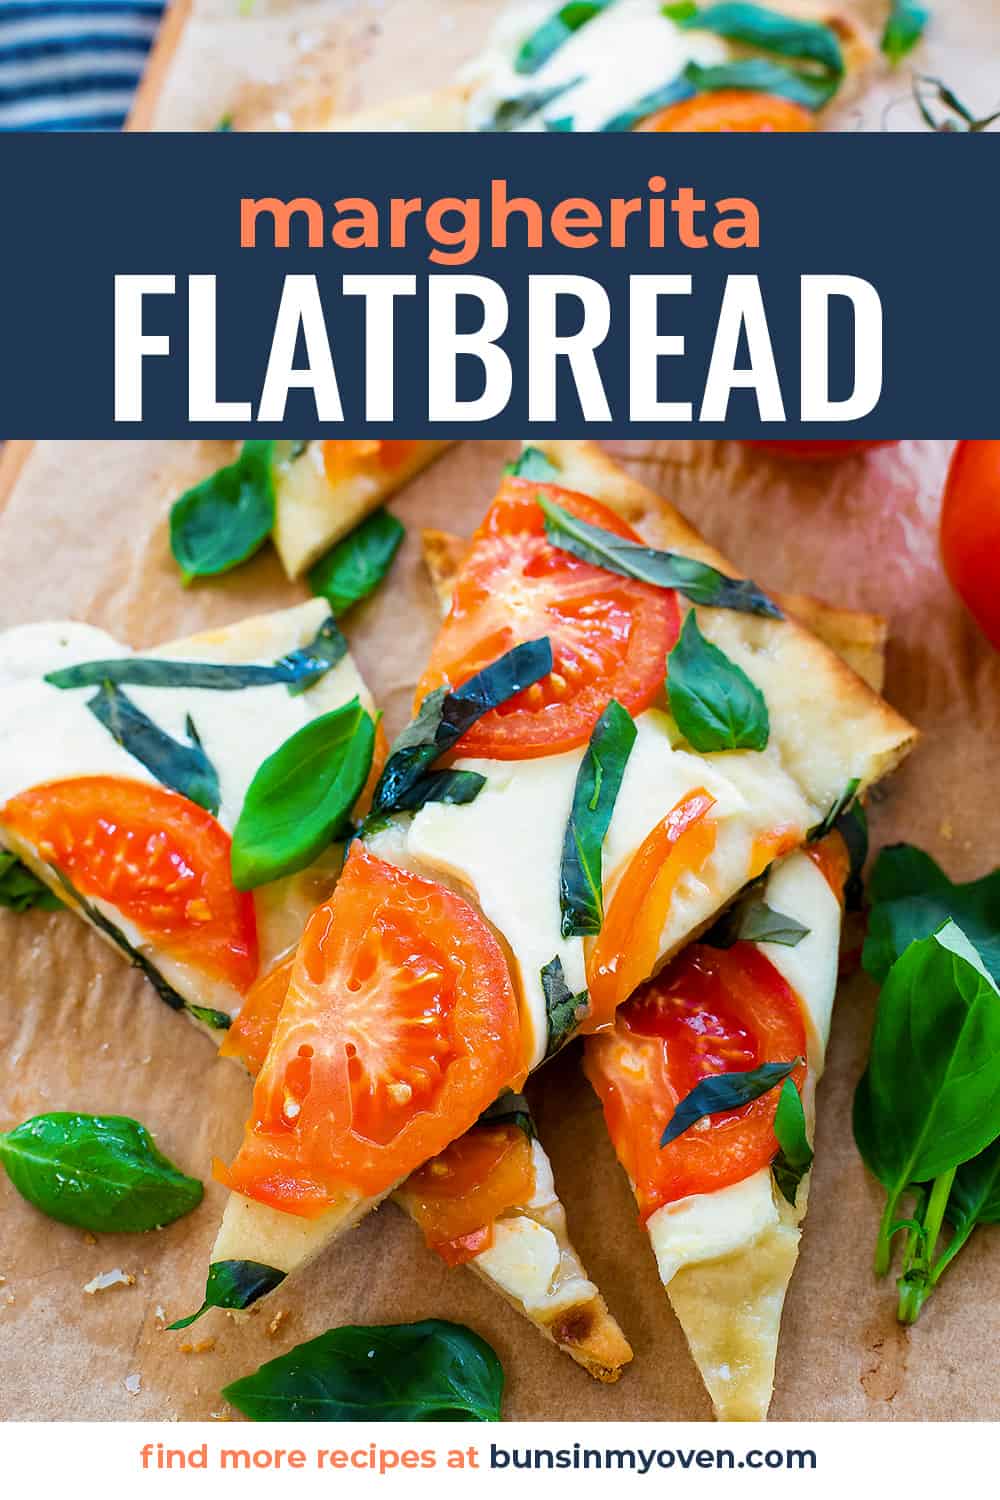 Margherita flatbread slices with text for pinterest.